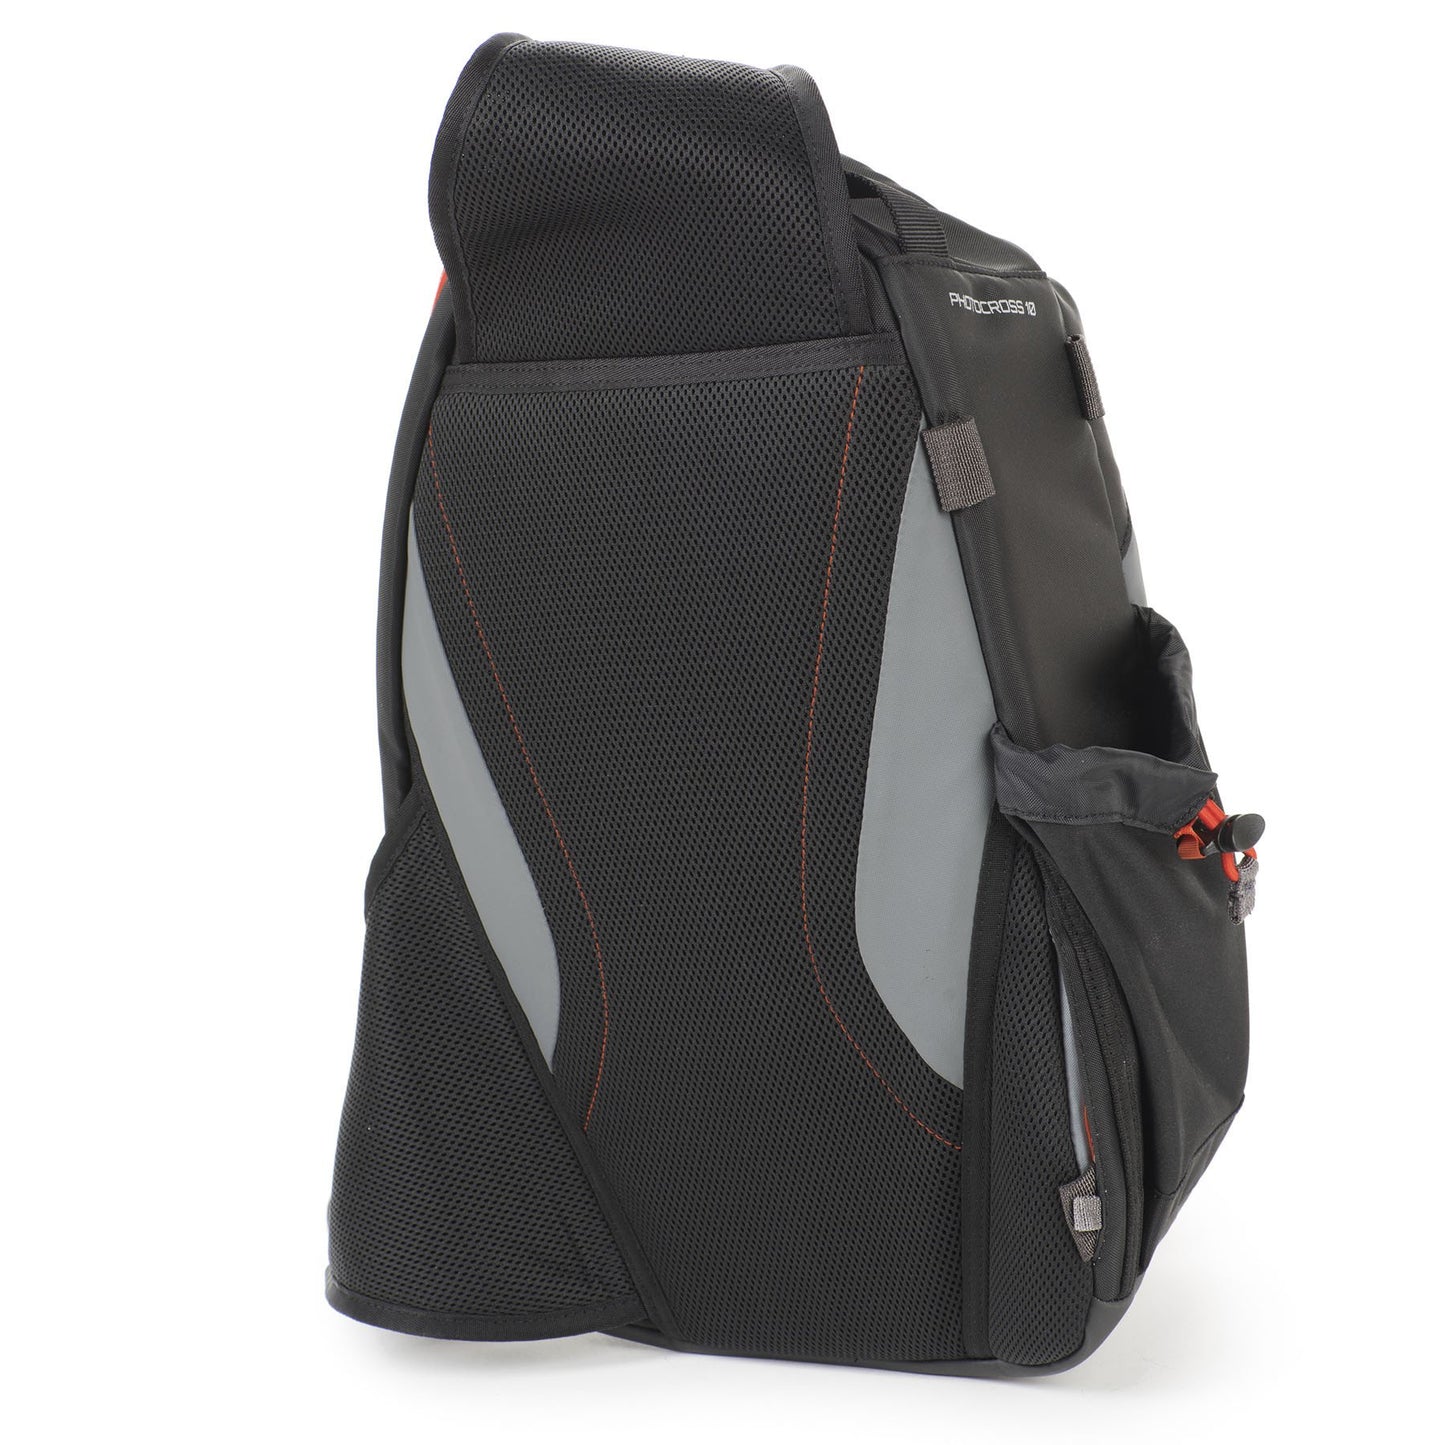 
                  
                    Breathable 320G air-mesh back panel keeps your back cool during long days
                  
                